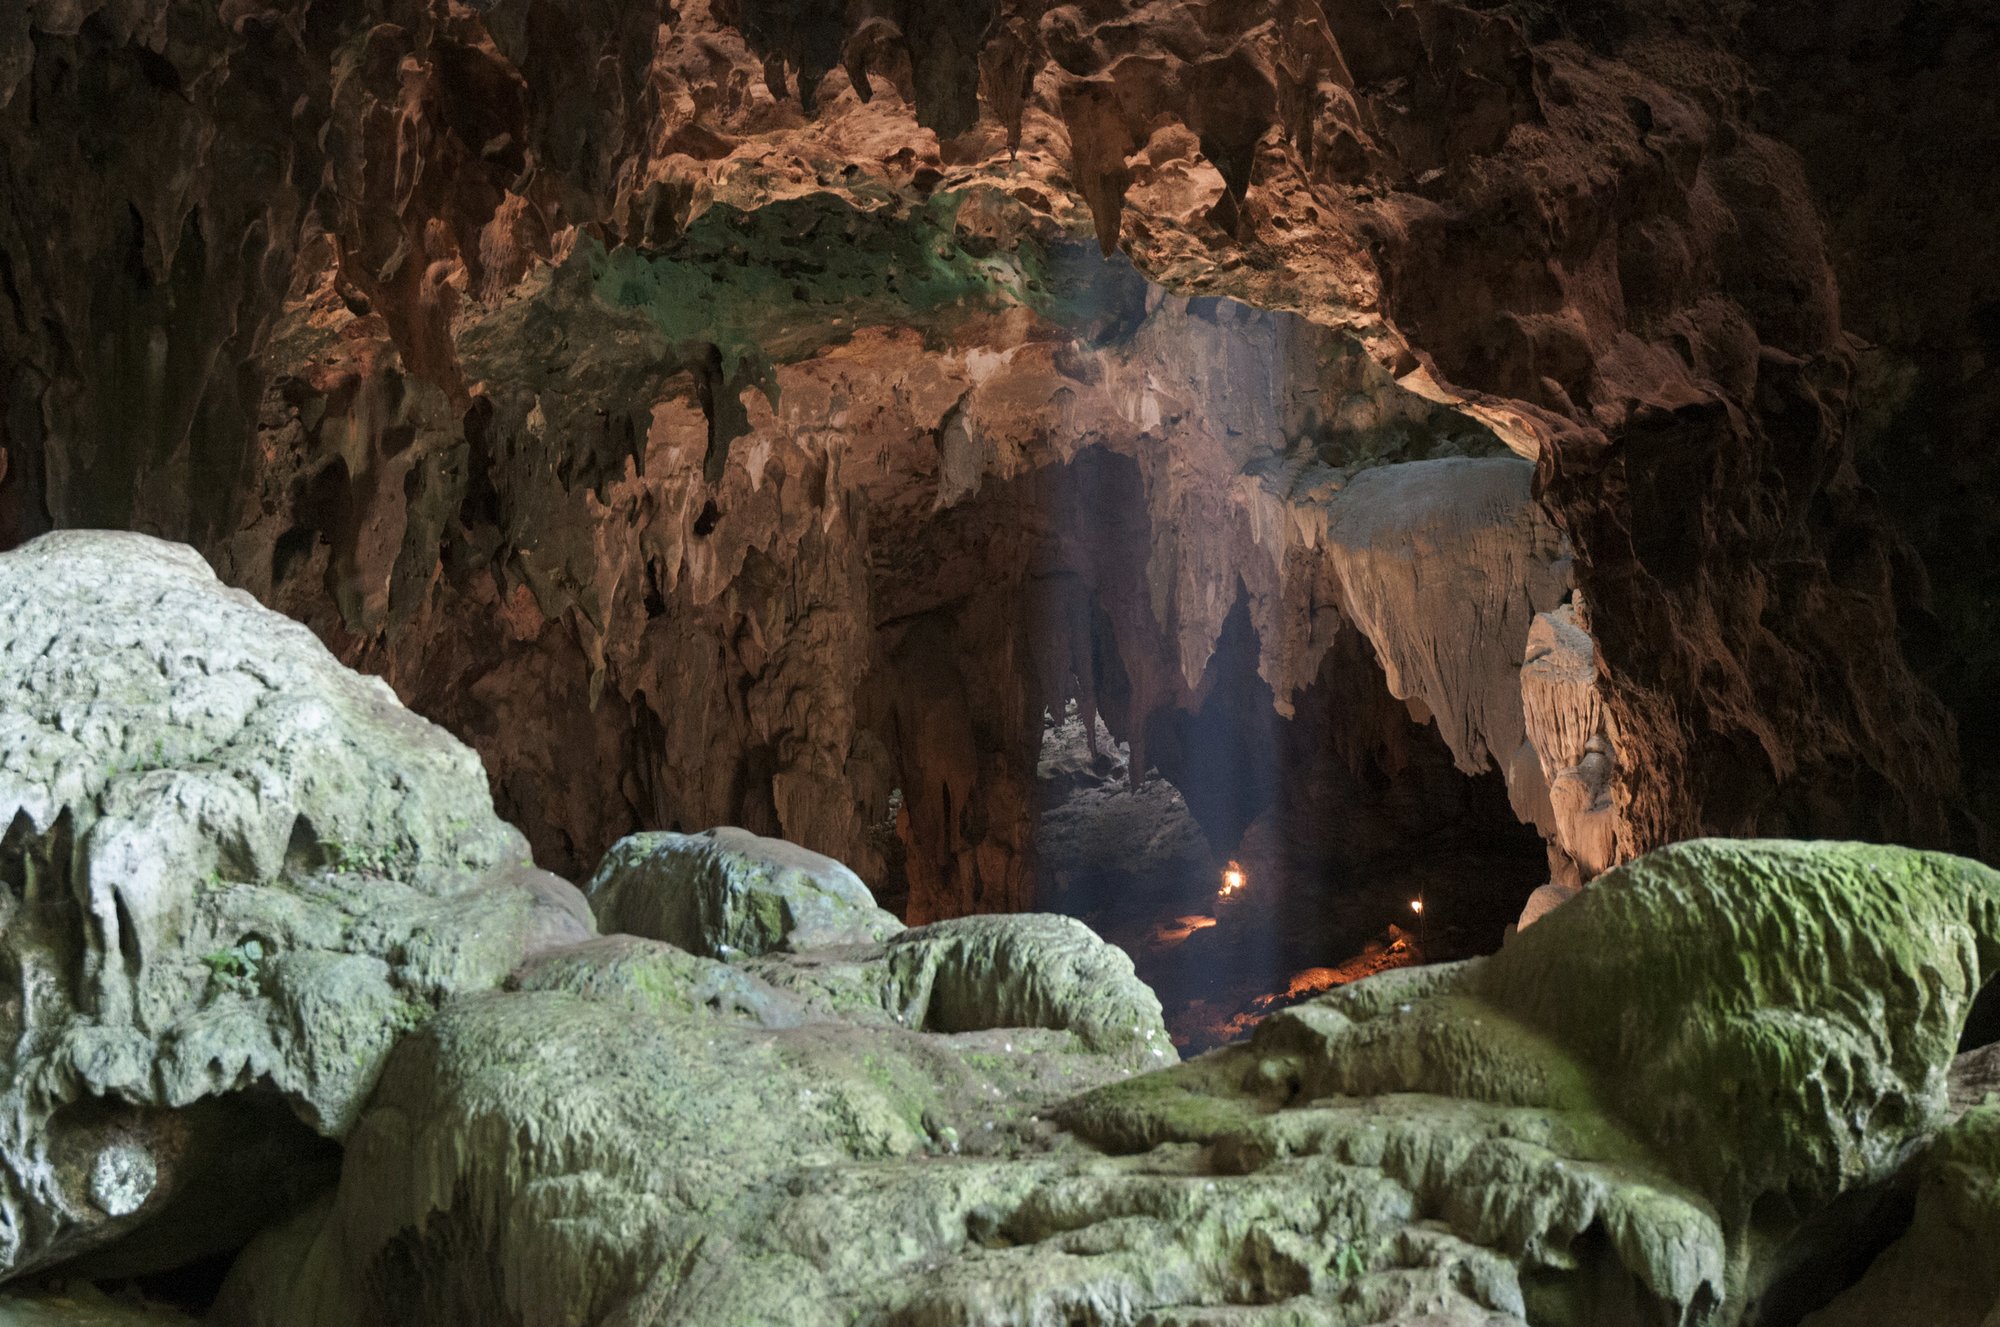 Callao Cave on Luzon Island of the Philippines, where the fossils of Homo luzonensis were discovered